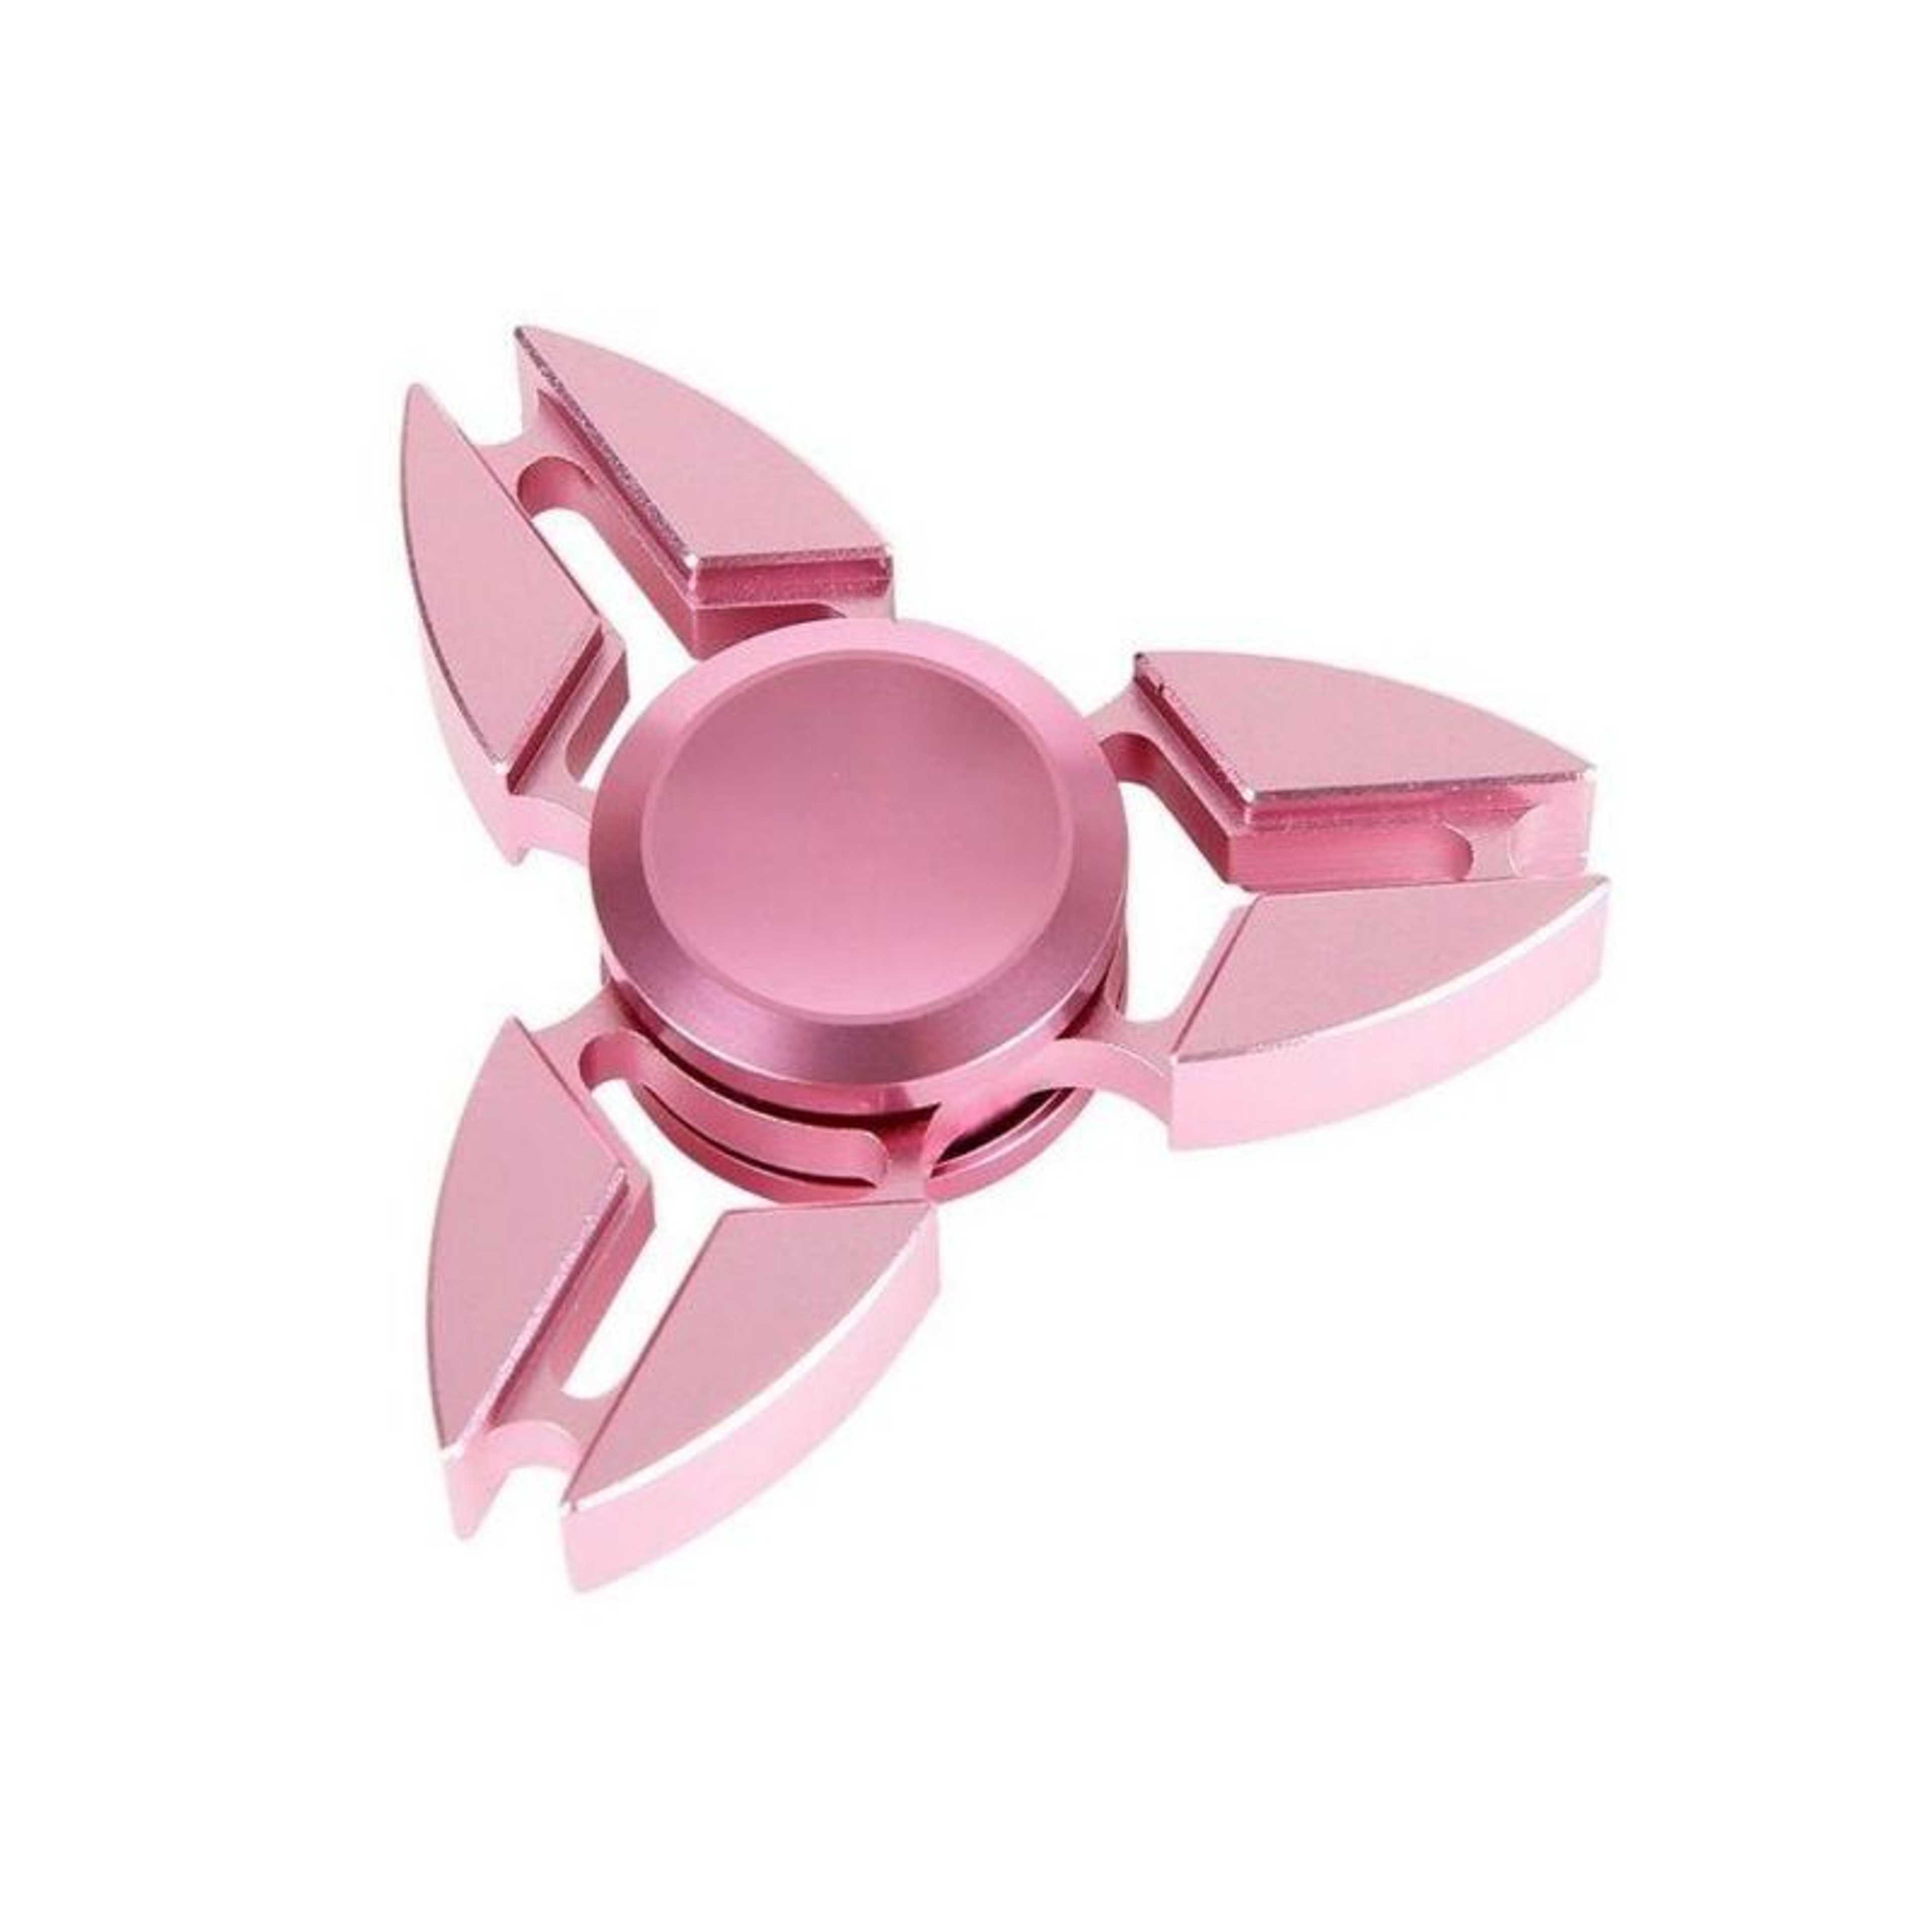 360 Degree Metalic Fidget Spinner Reducer Stress and Aniti- Anixety Austism Relief Toy For Kids with Steel Bearing for change of Mood Captain America Ninja Hexa,Penta sided thin triangle Relaxant Toy